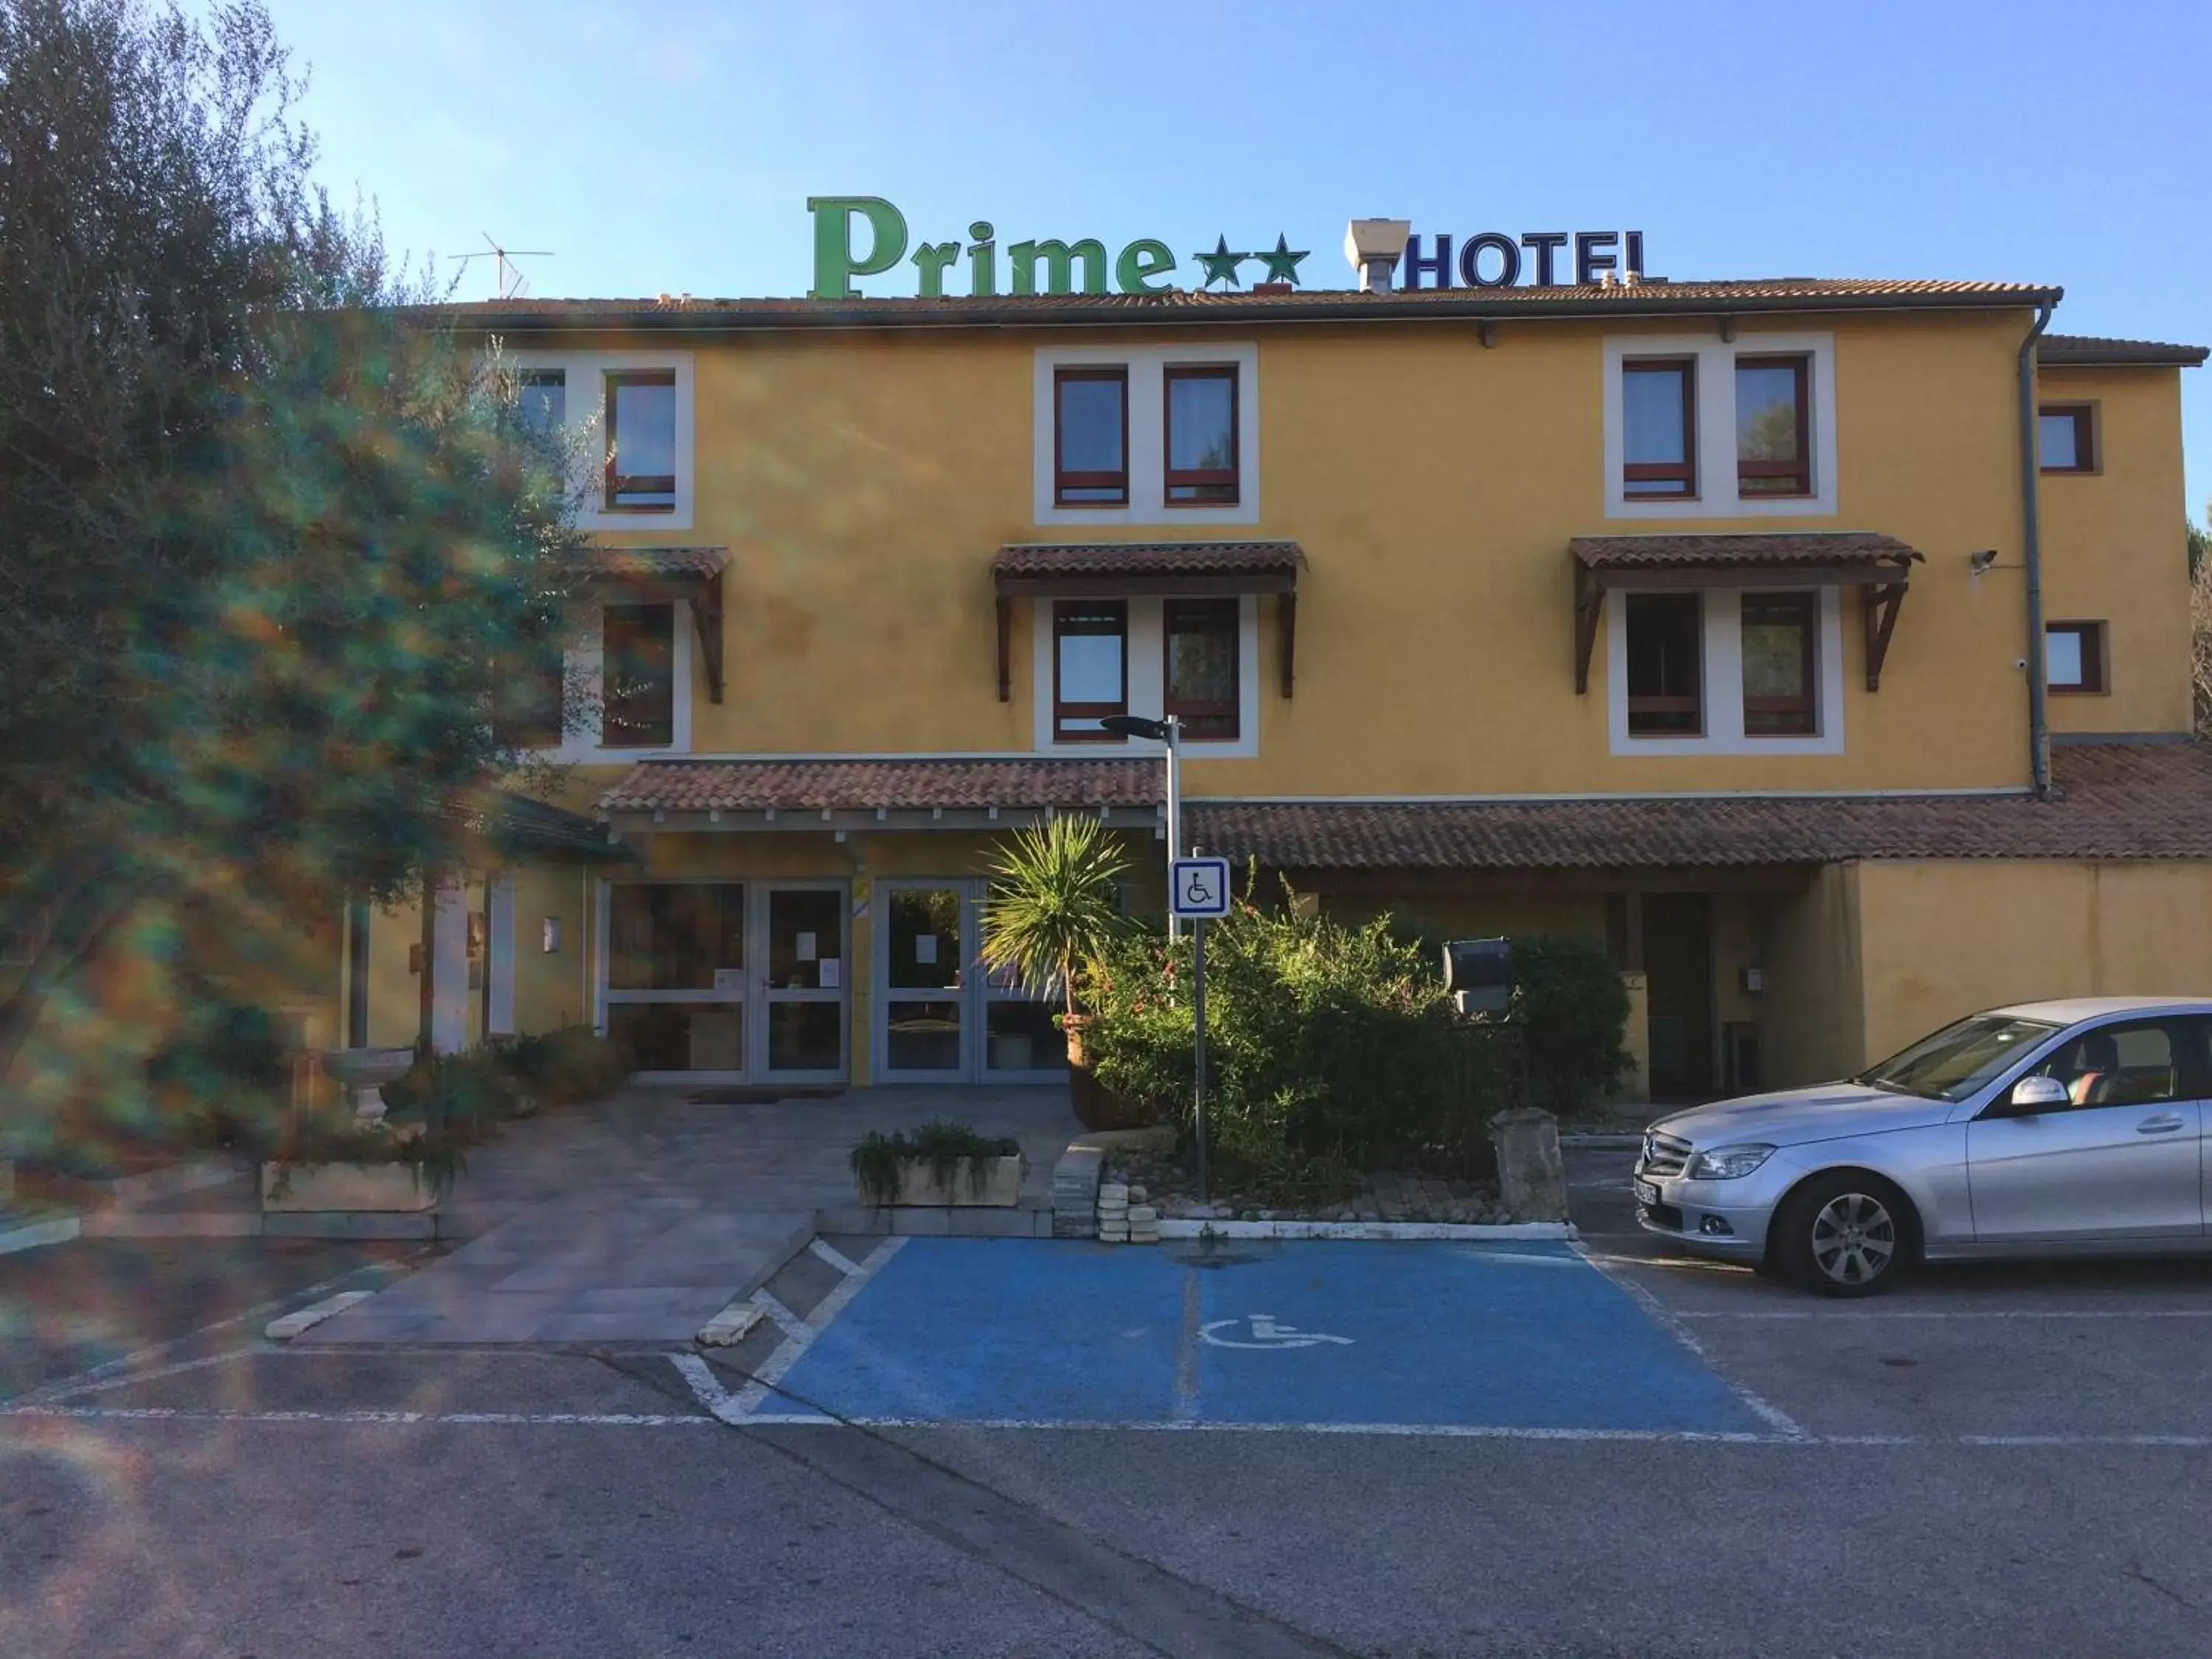 Property Building in Cit'Hotel Hotel Prime - A709